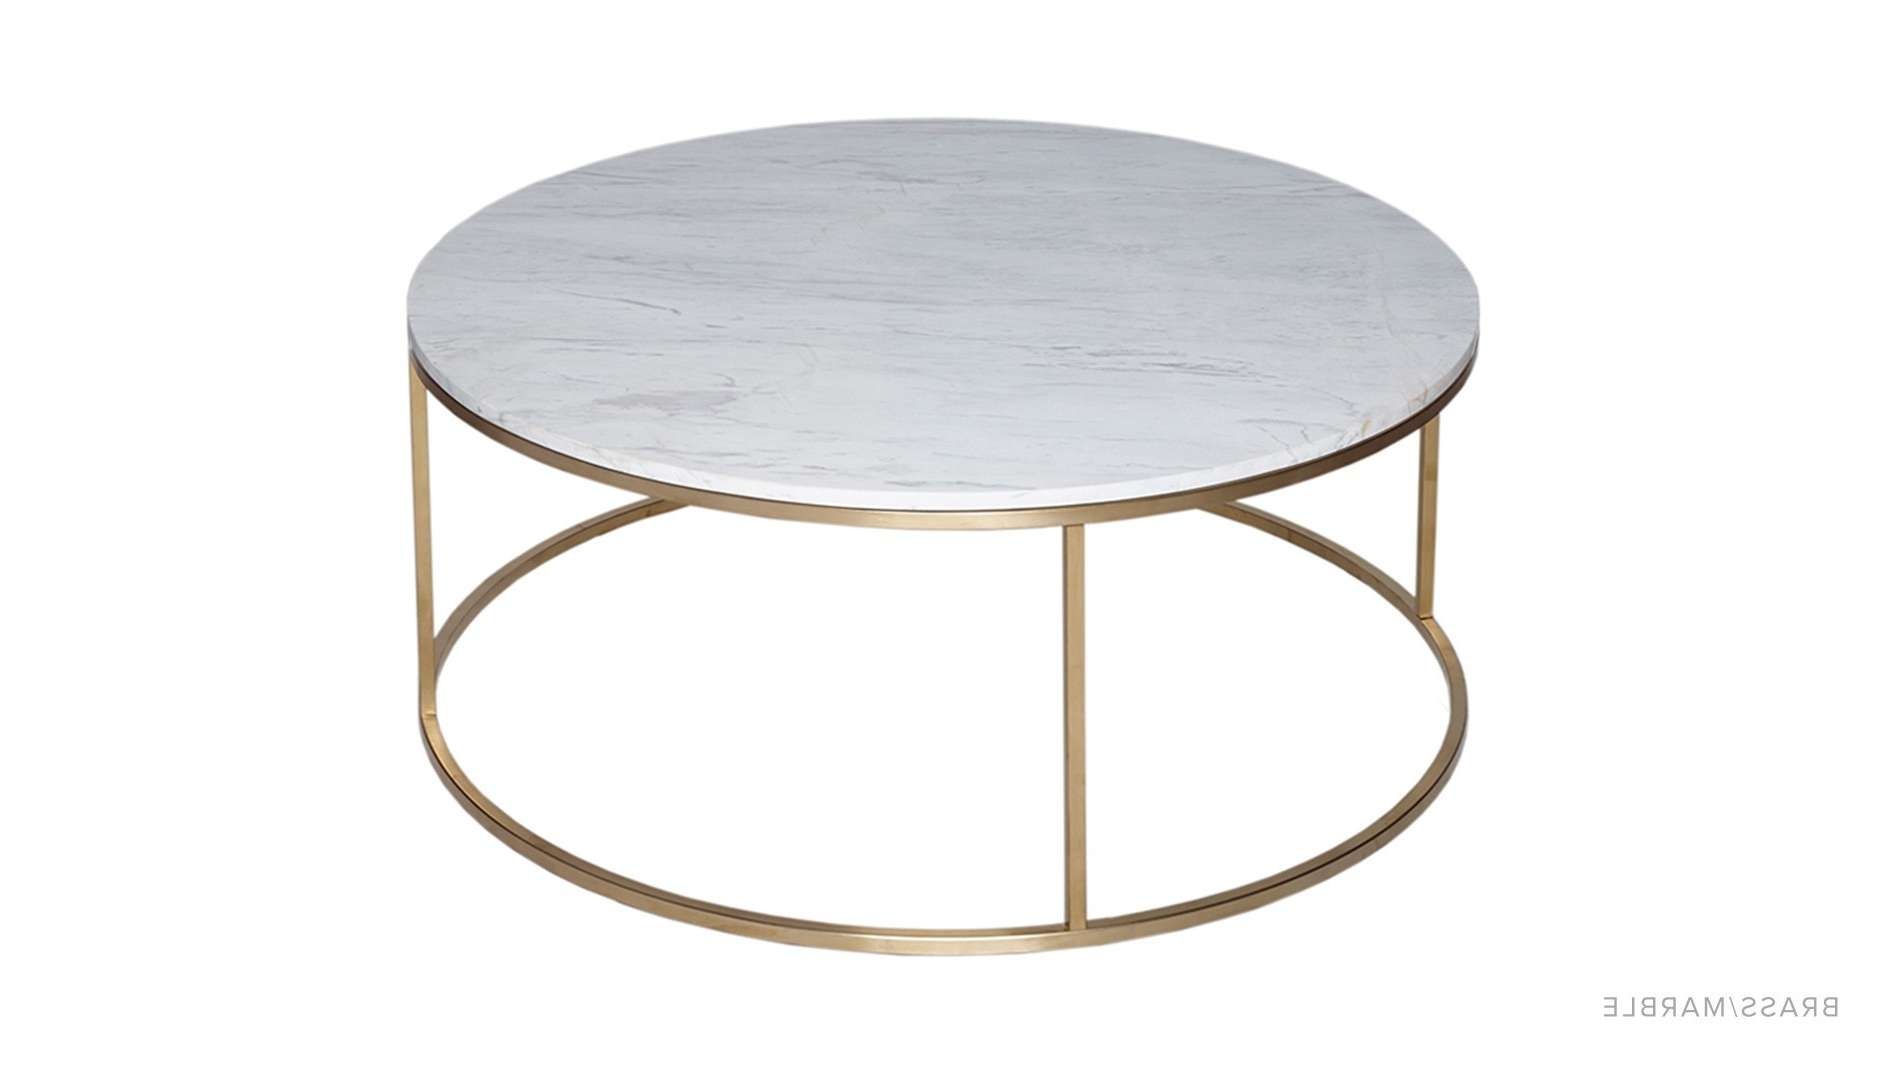 Fashionable Circle Coffee Tables With Regard To Circular Coffee Table – Luxdeco (View 13 of 20)